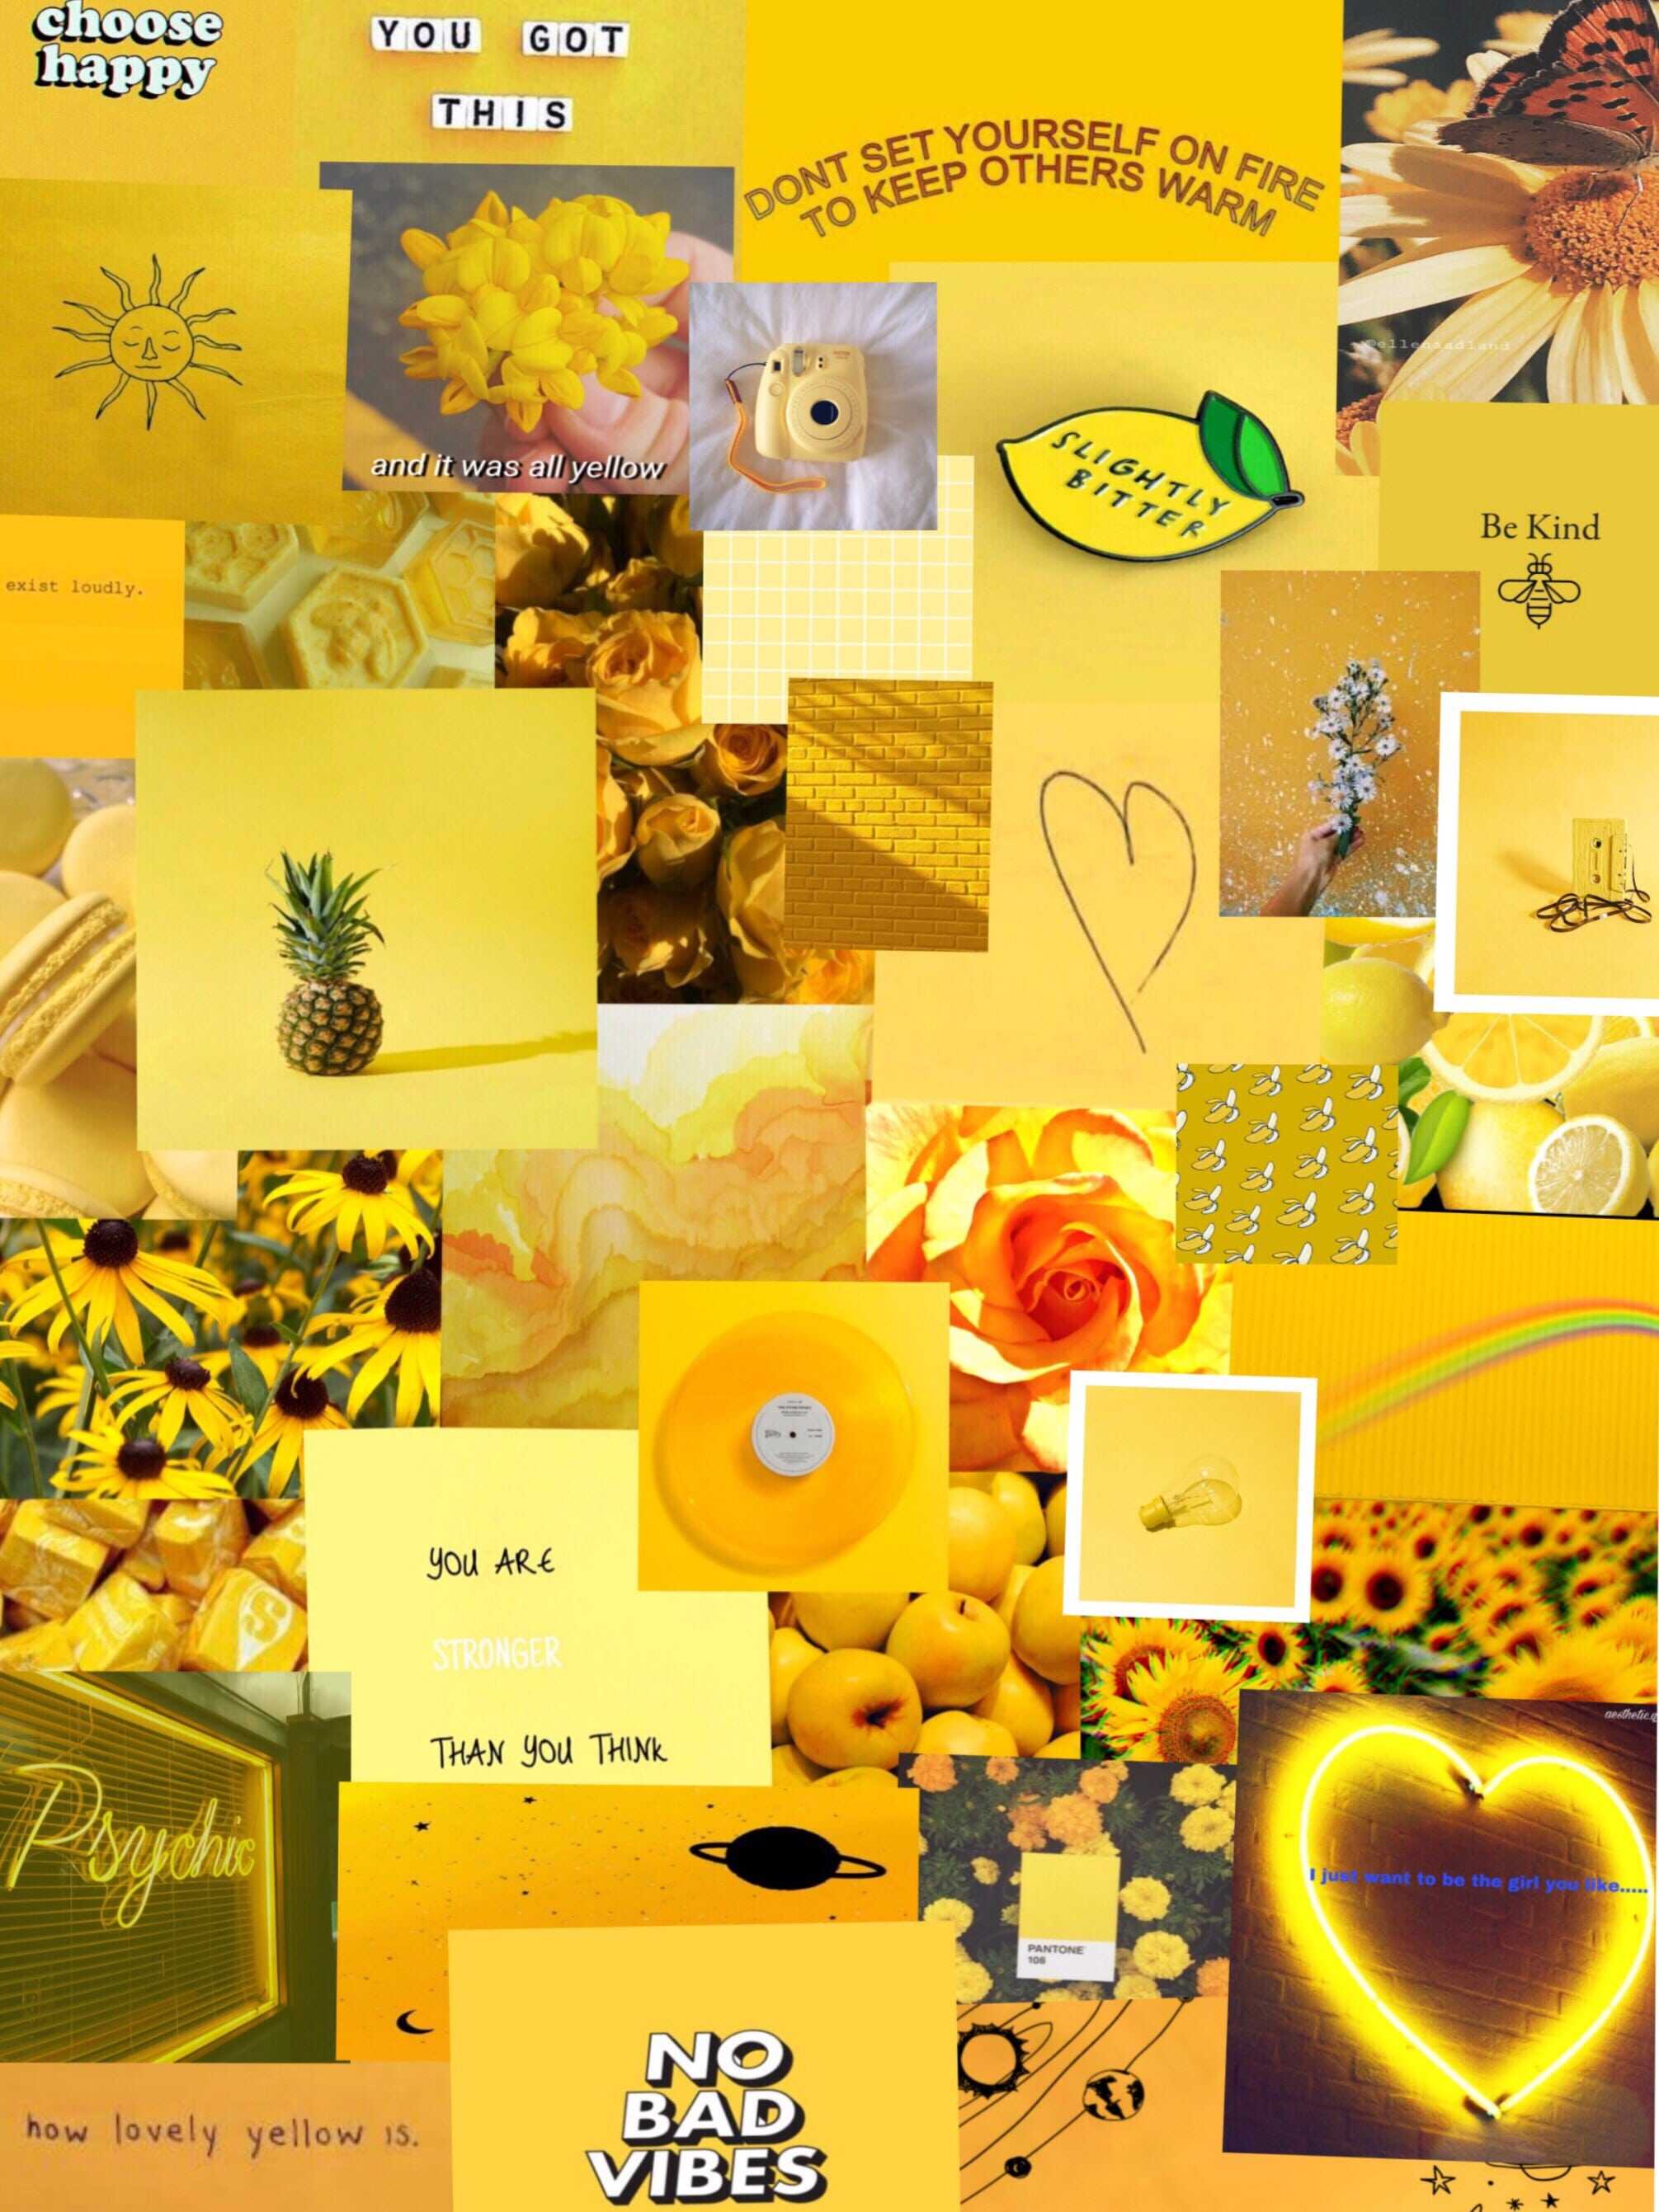 A collage of yellow aesthetic images including sunflowers, a heart, and a pineapple. - Yellow, yellow iphone, light yellow, warm